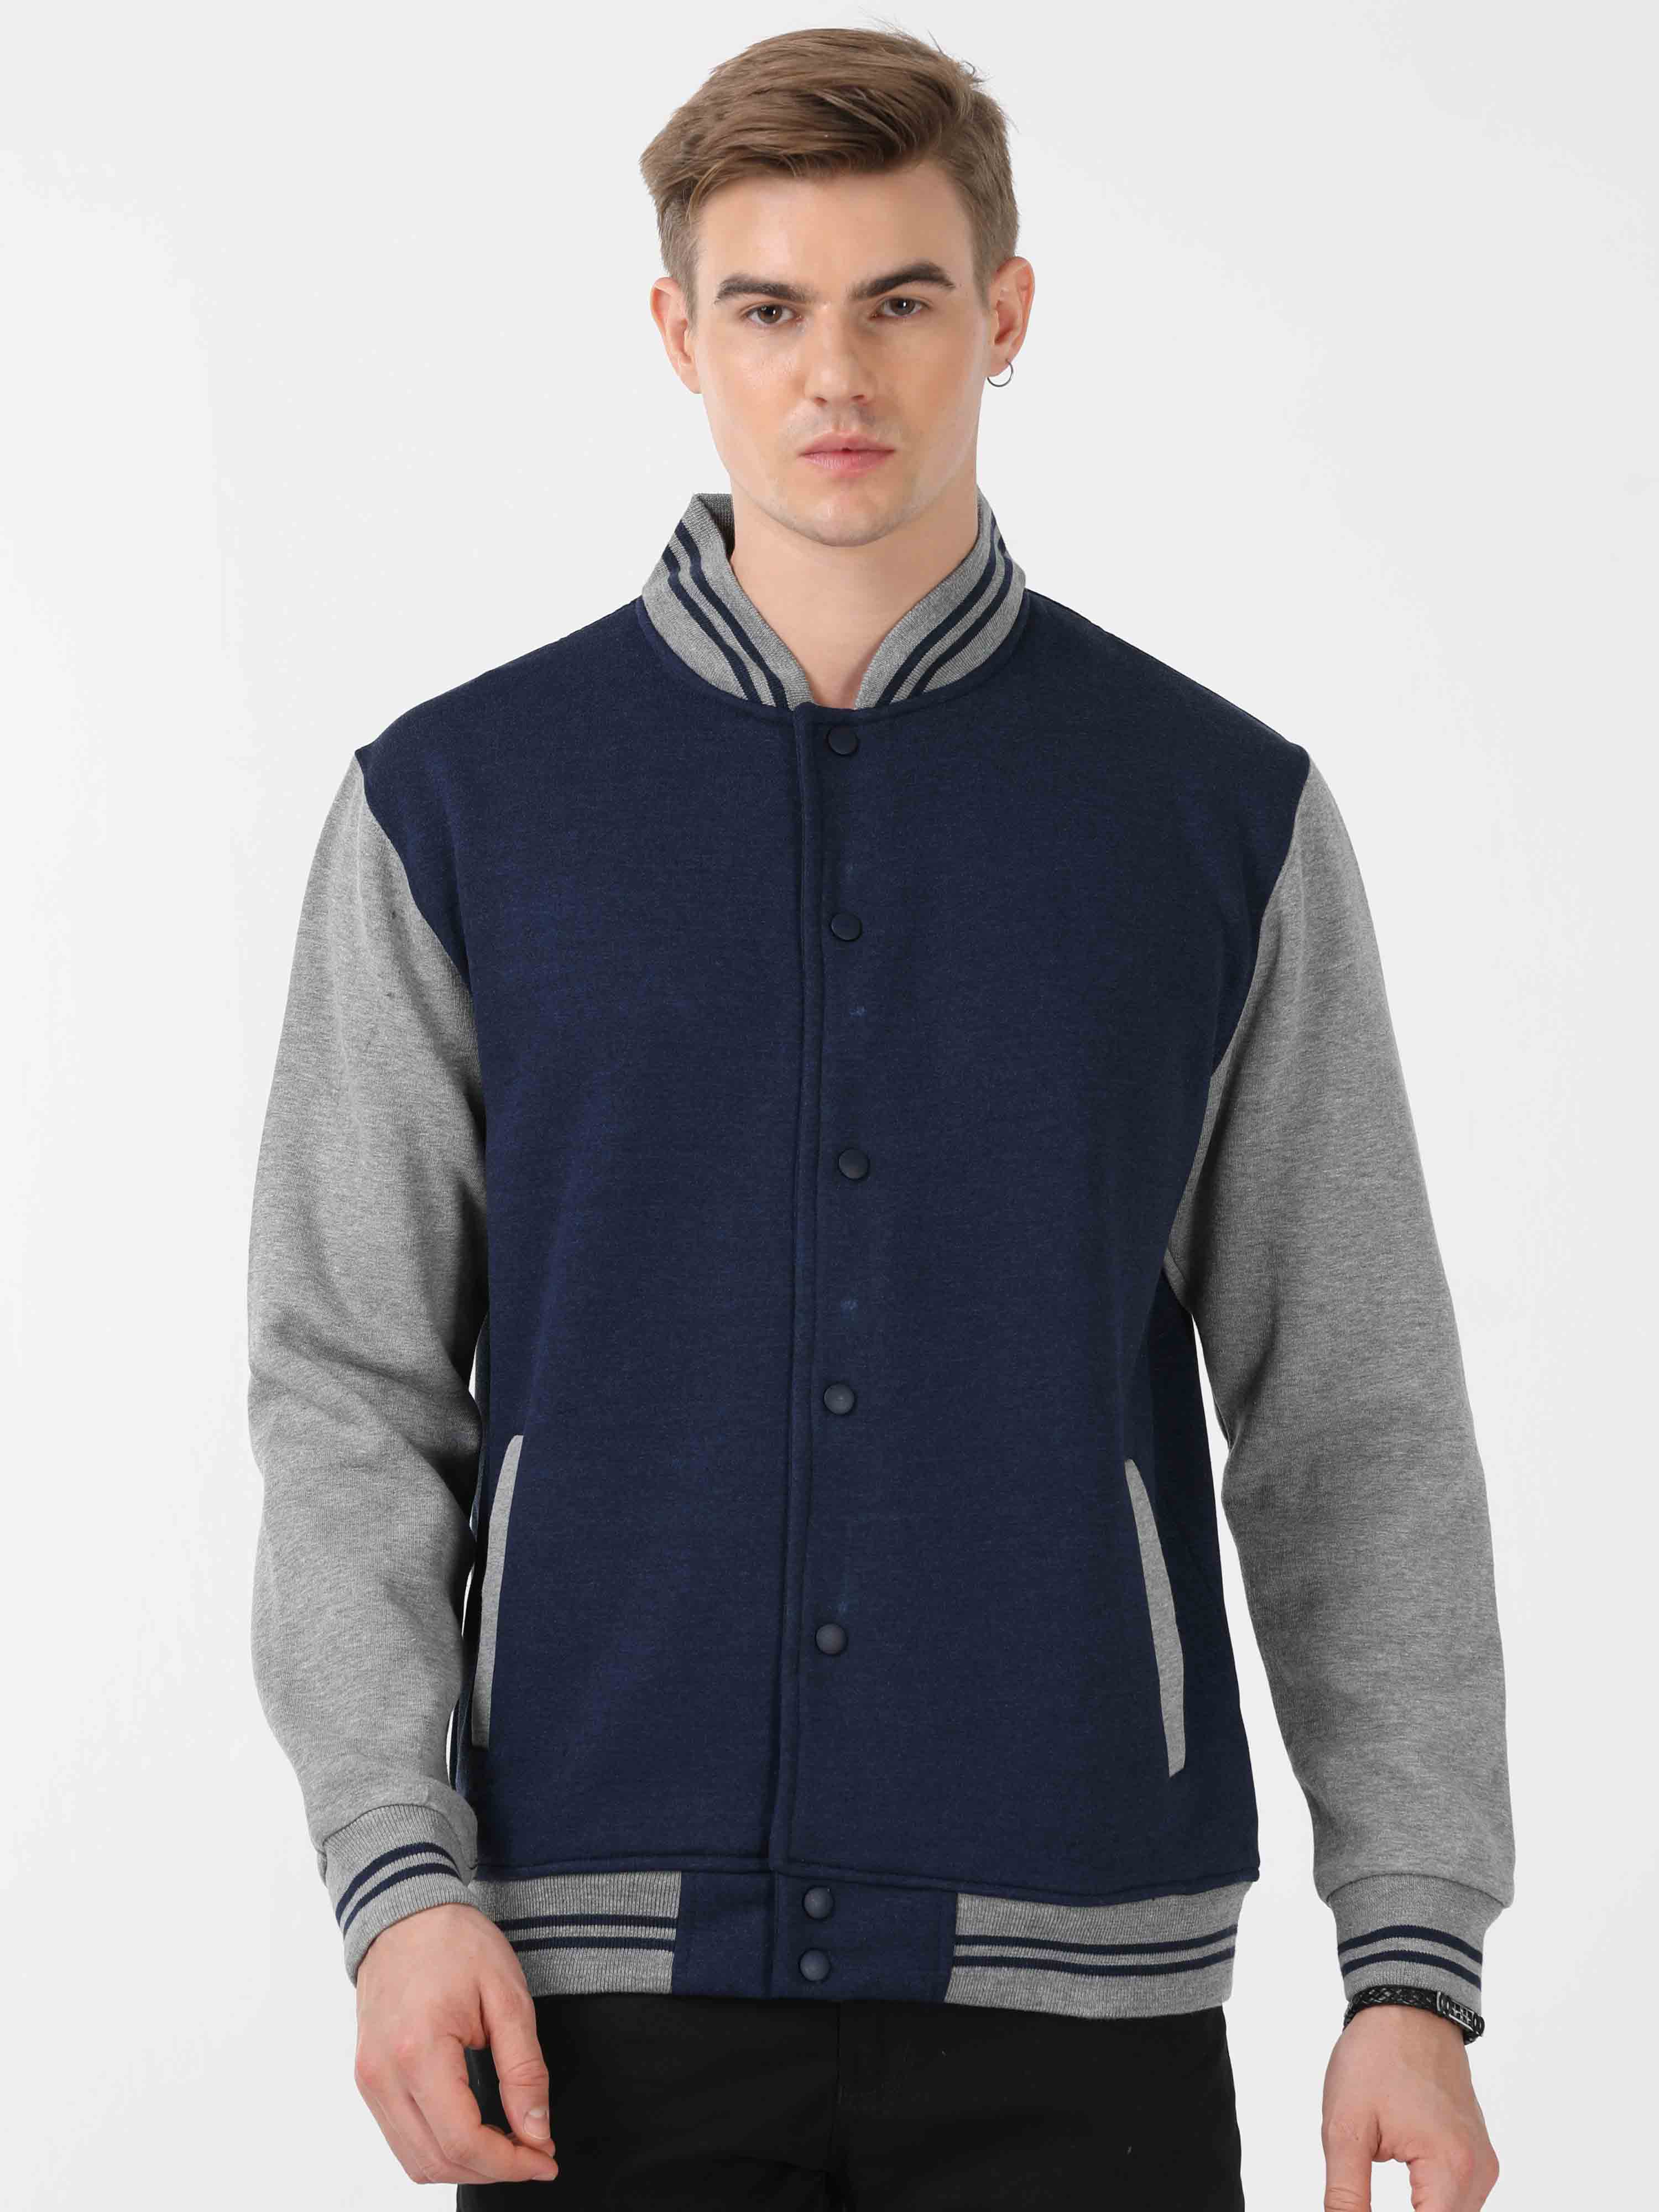 Quick Dry Black And White Varsity Jackets For Mens With Cotton Fabrics And  Normal Wash at Best Price in Chennai | Anand Sports